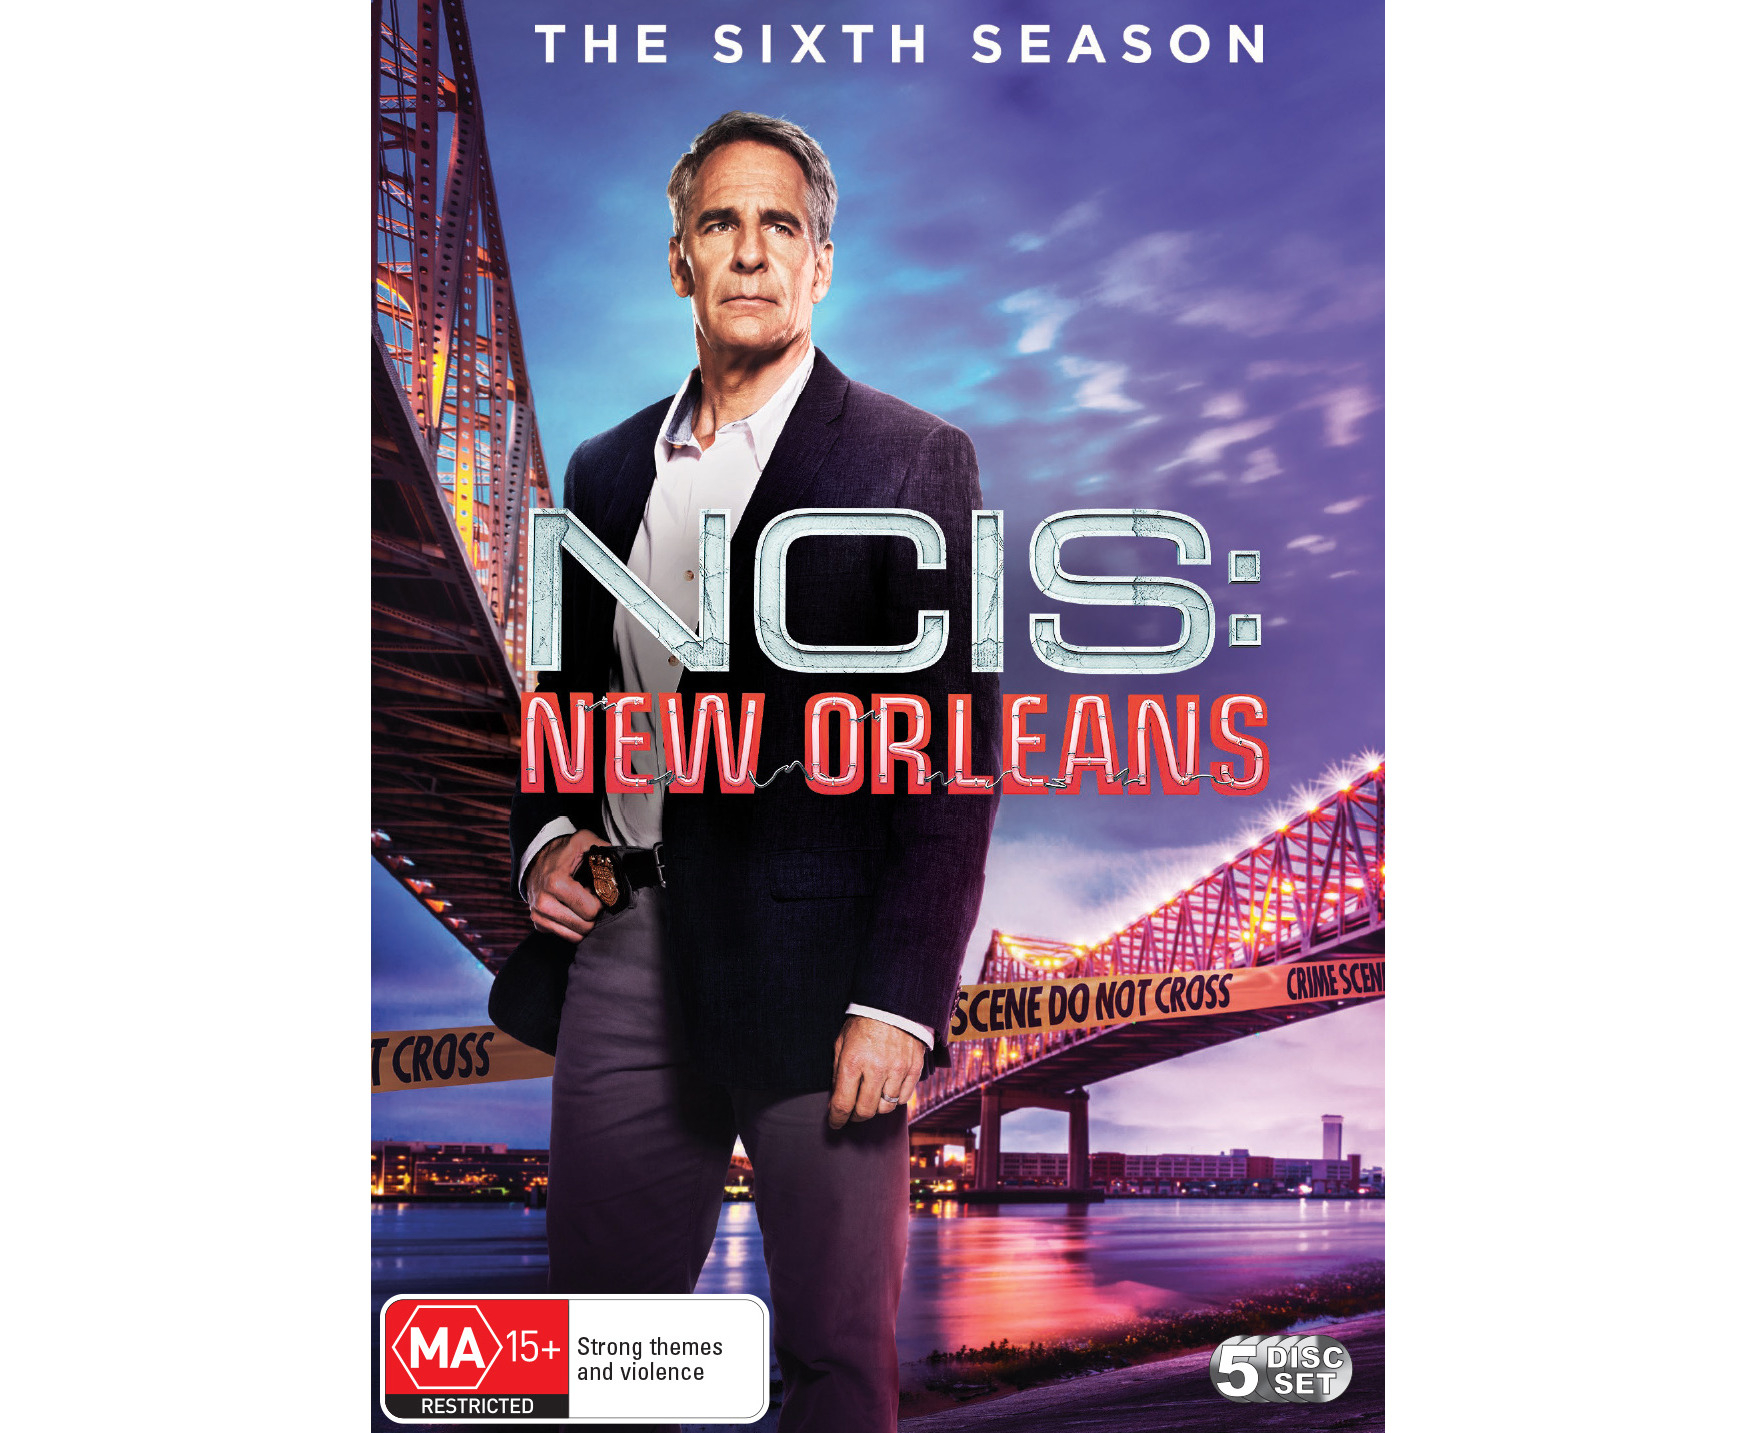 Ncis: New Orleans: The Complete Series (dvd) : Target